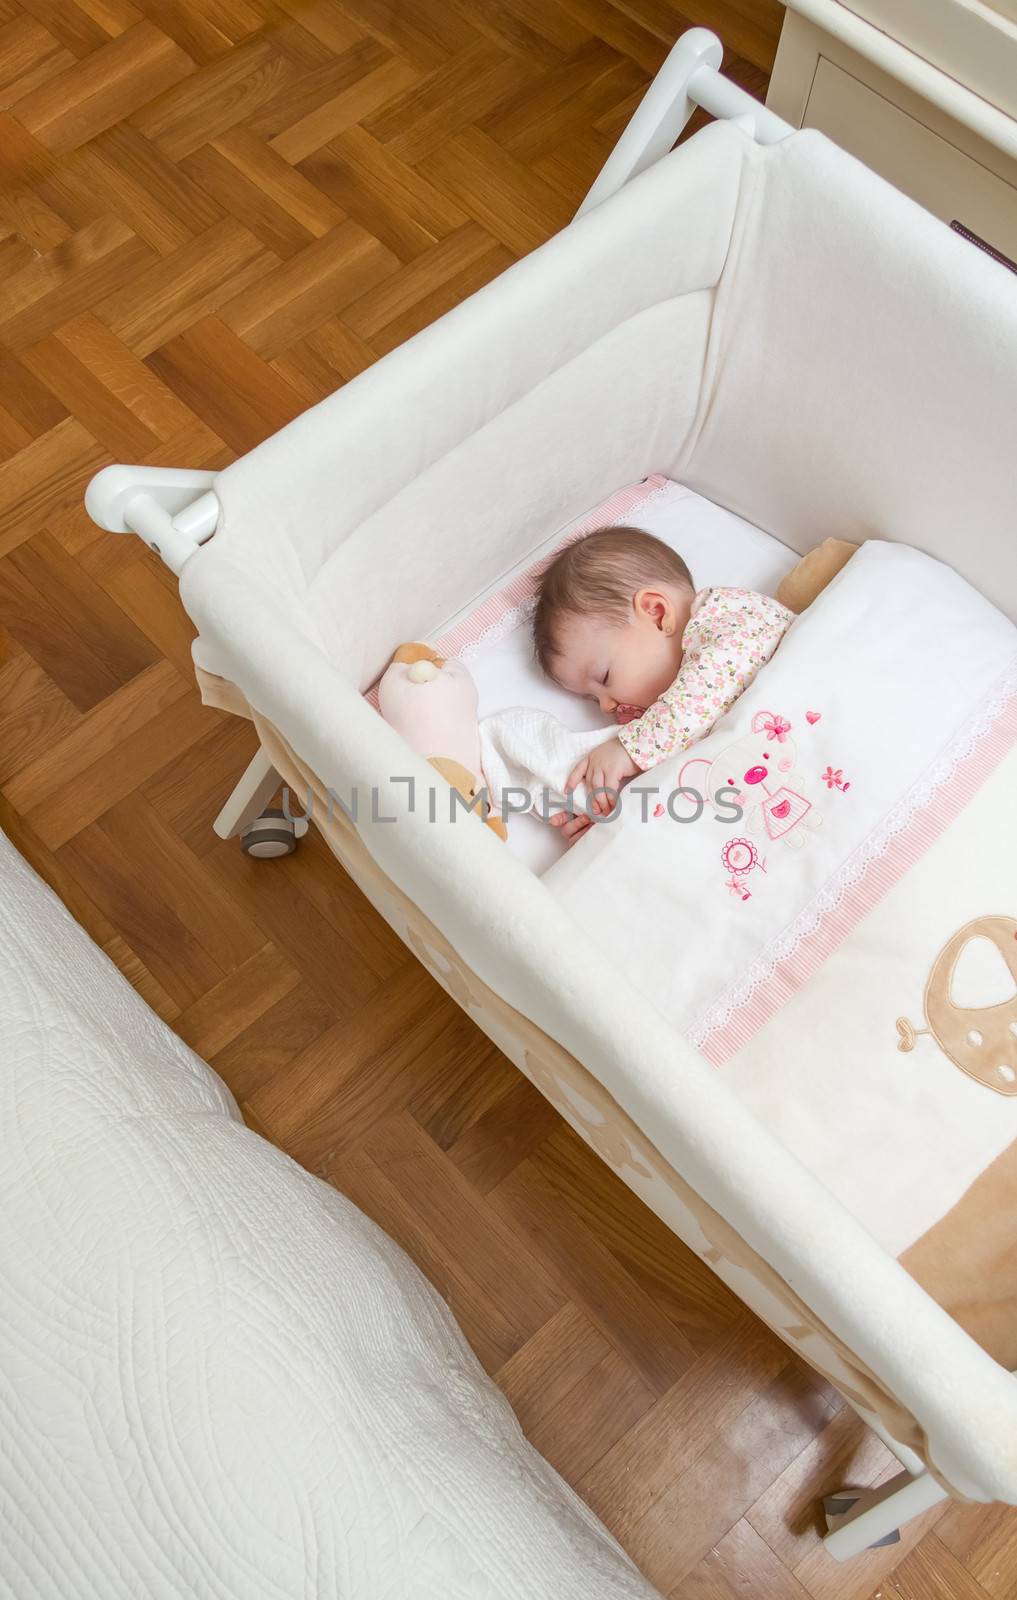 Baby girl sleeping in a cot with pacifier and toy by doble.d